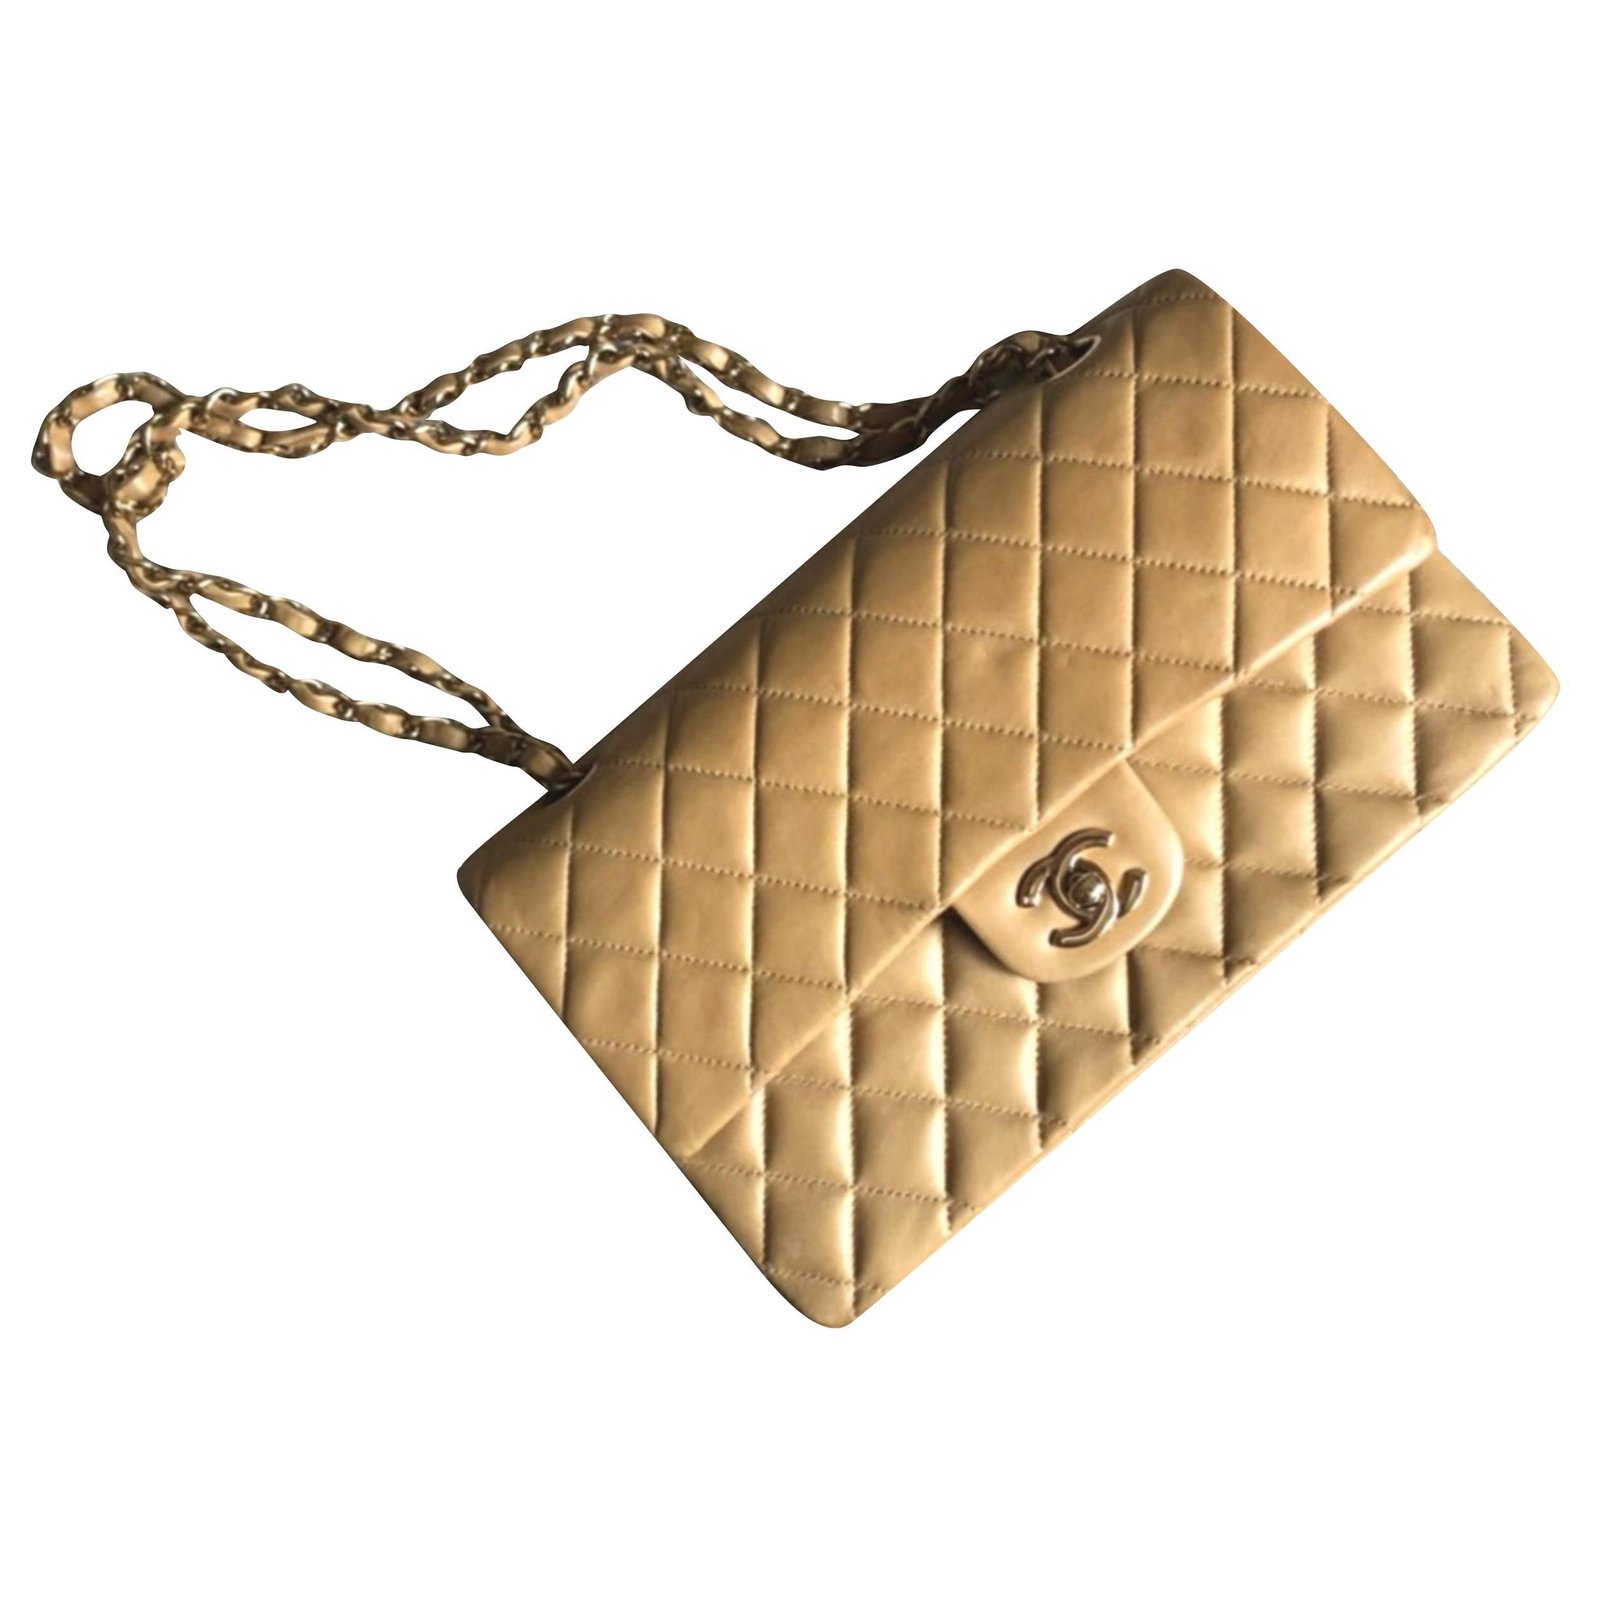 Chanel Bags Switch from Serial Stickers to Microchips in 2021  Madison  Avenue Couture